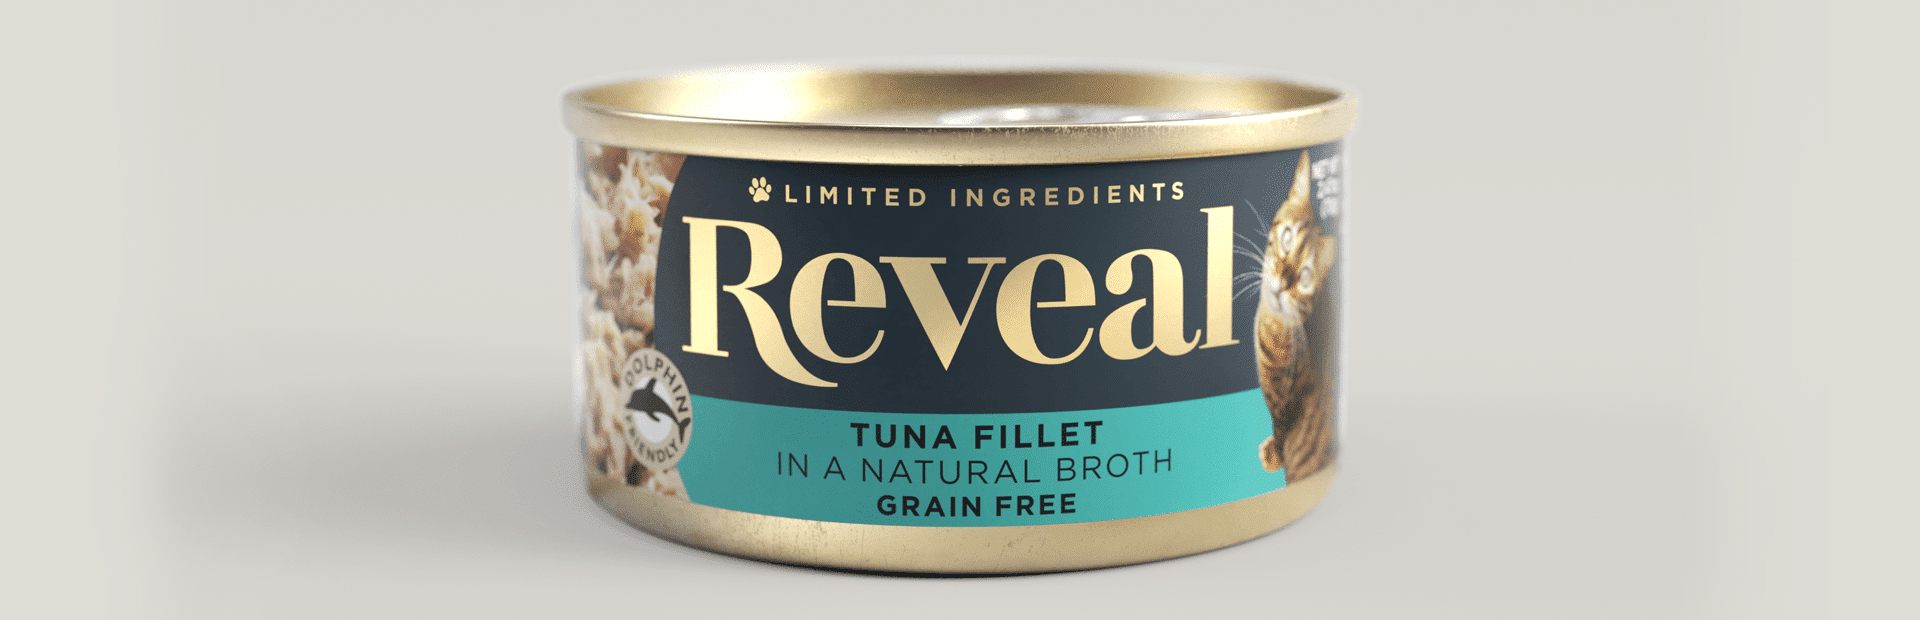 Tuna Fillet Limited Ingredient Canned Cat Food Reveal